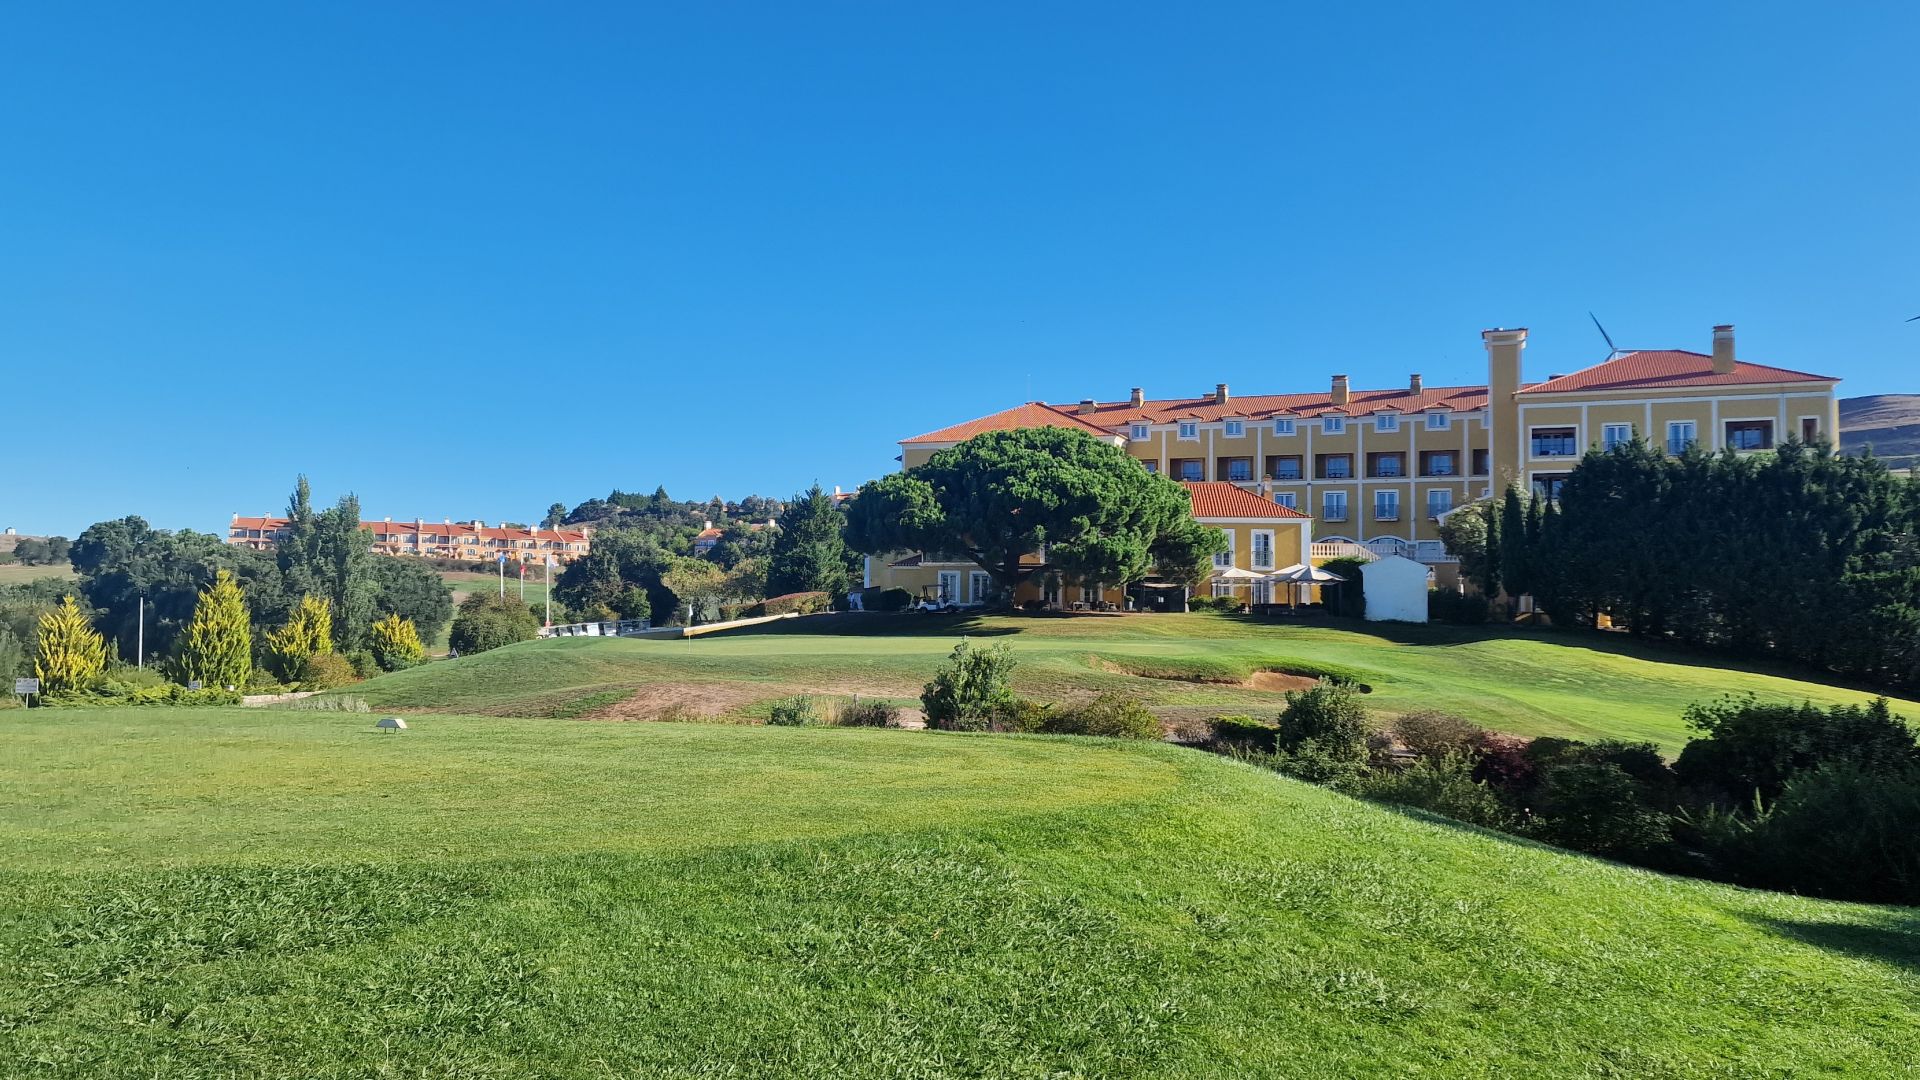 Dolce Campo Real golf course in Lisbon, Portugal.